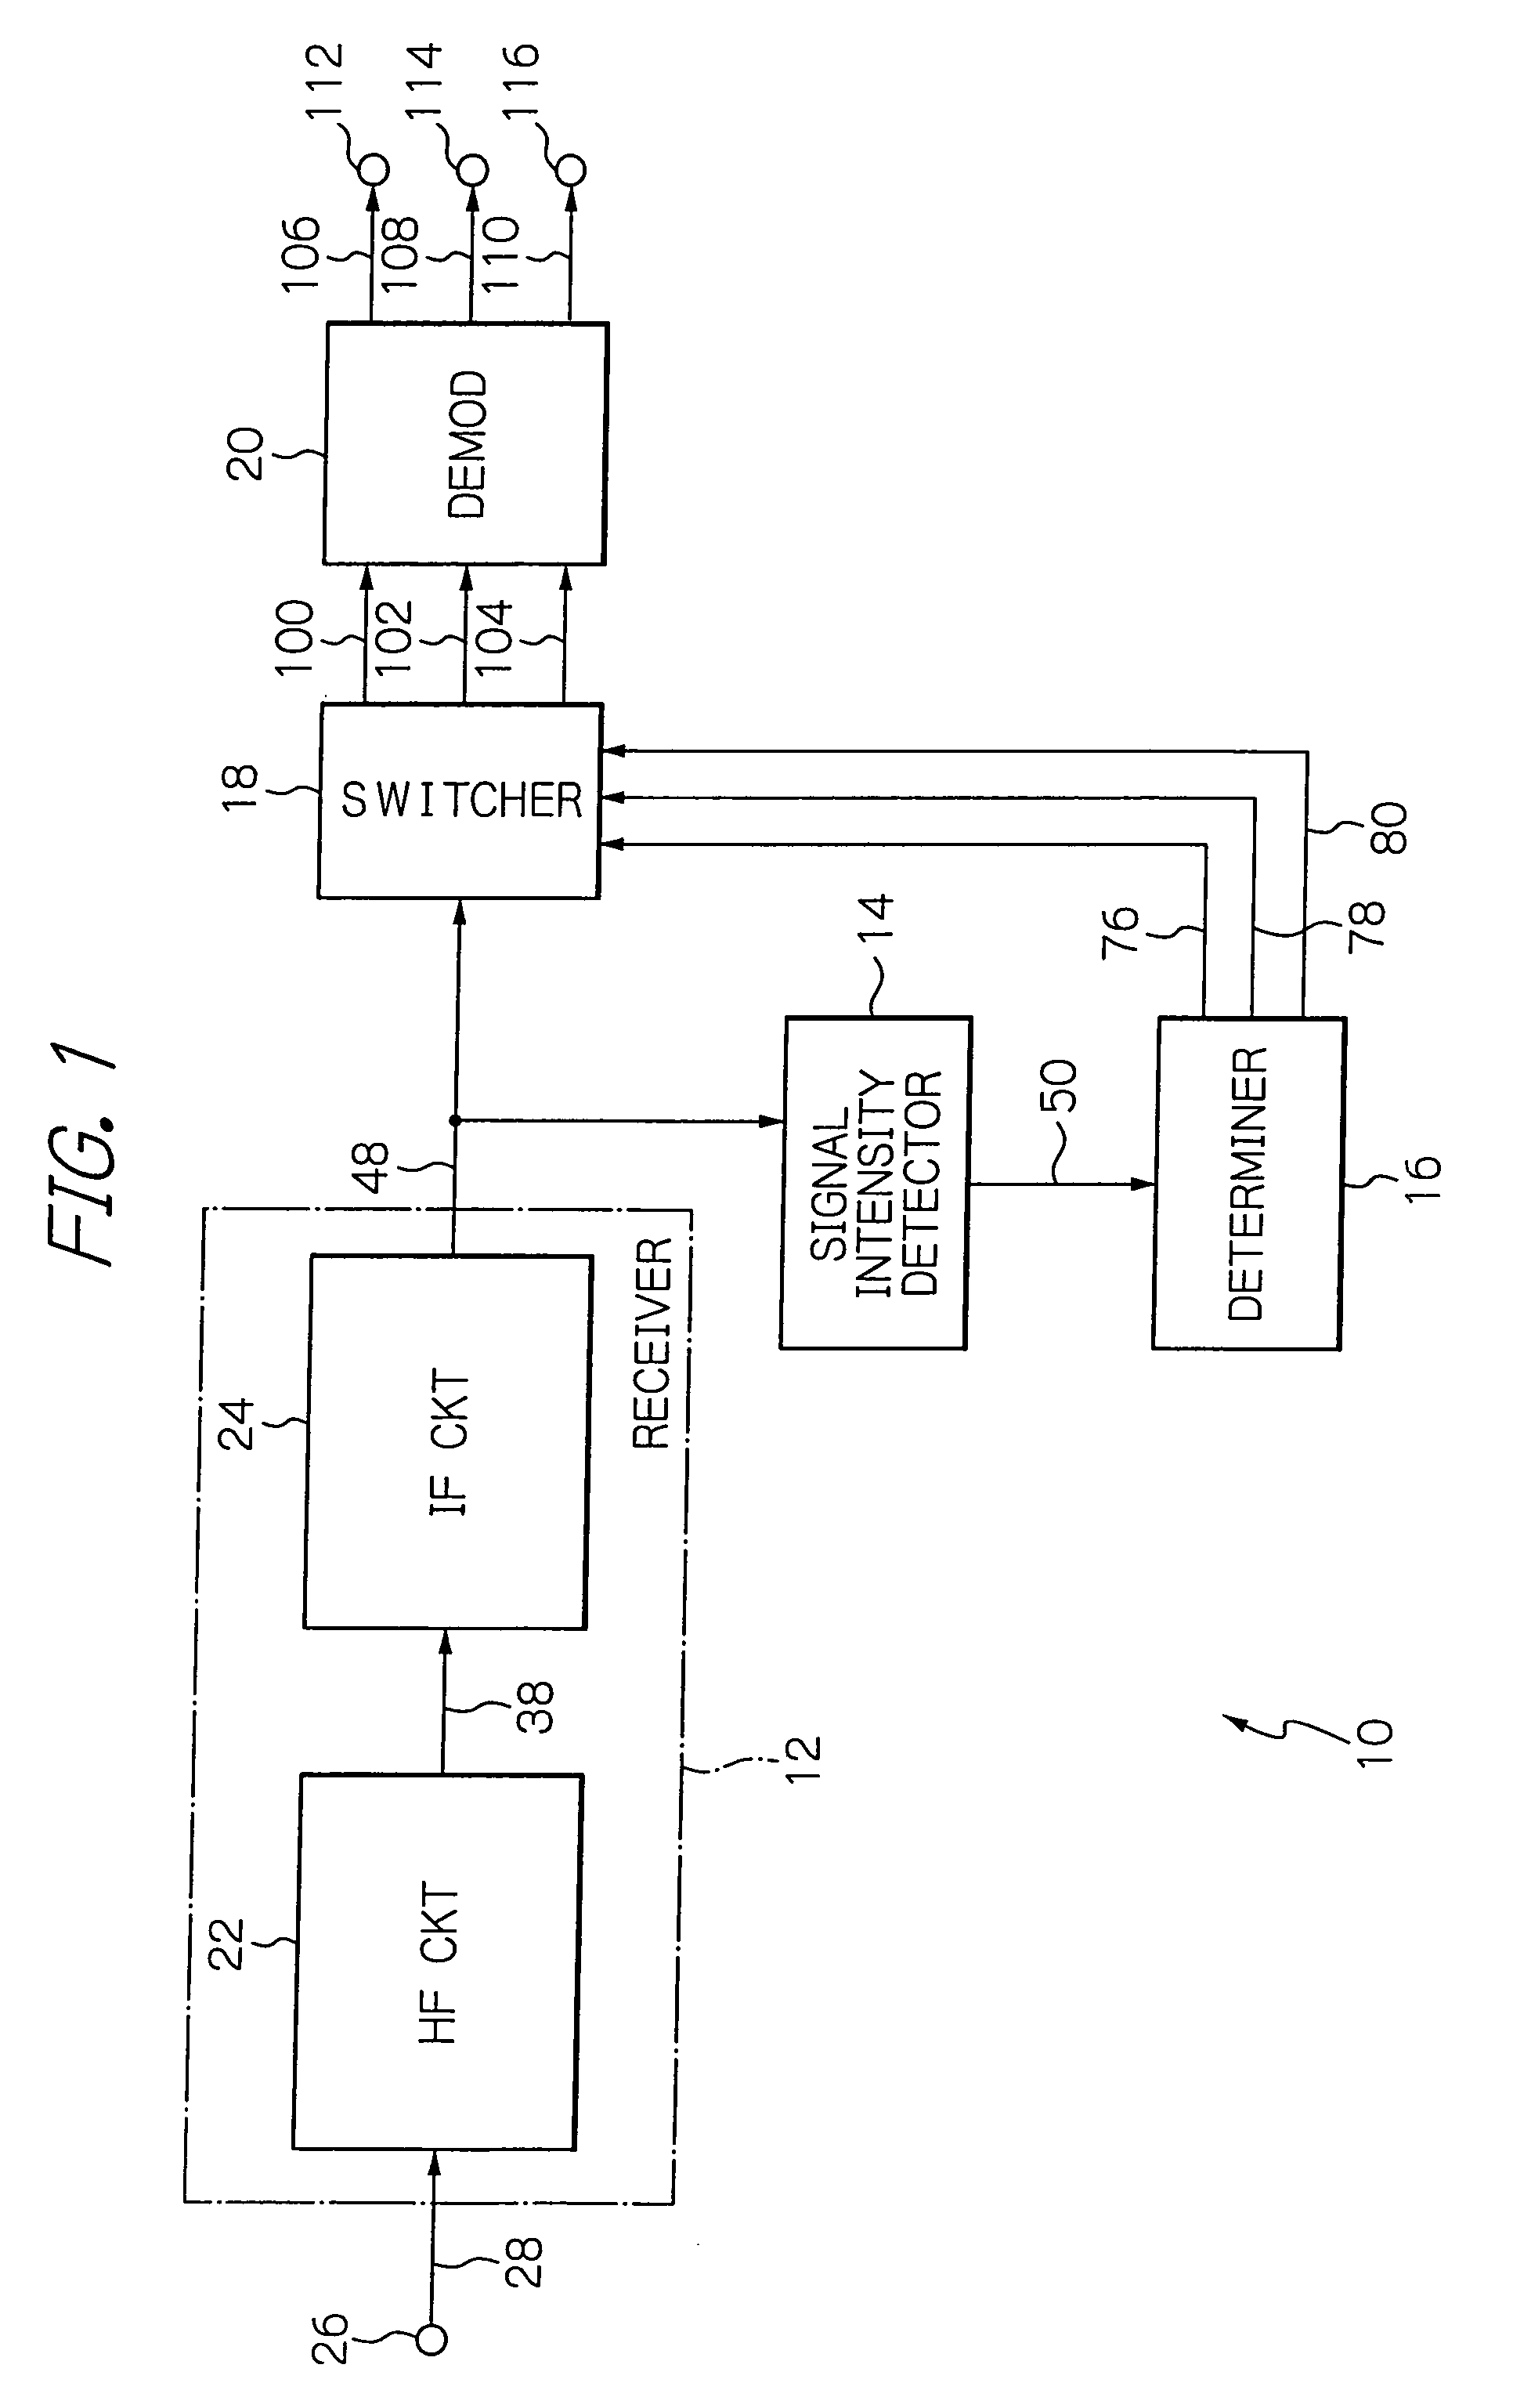 Multi-mode receiver circuit for dealing with various modulation systems and signal formats